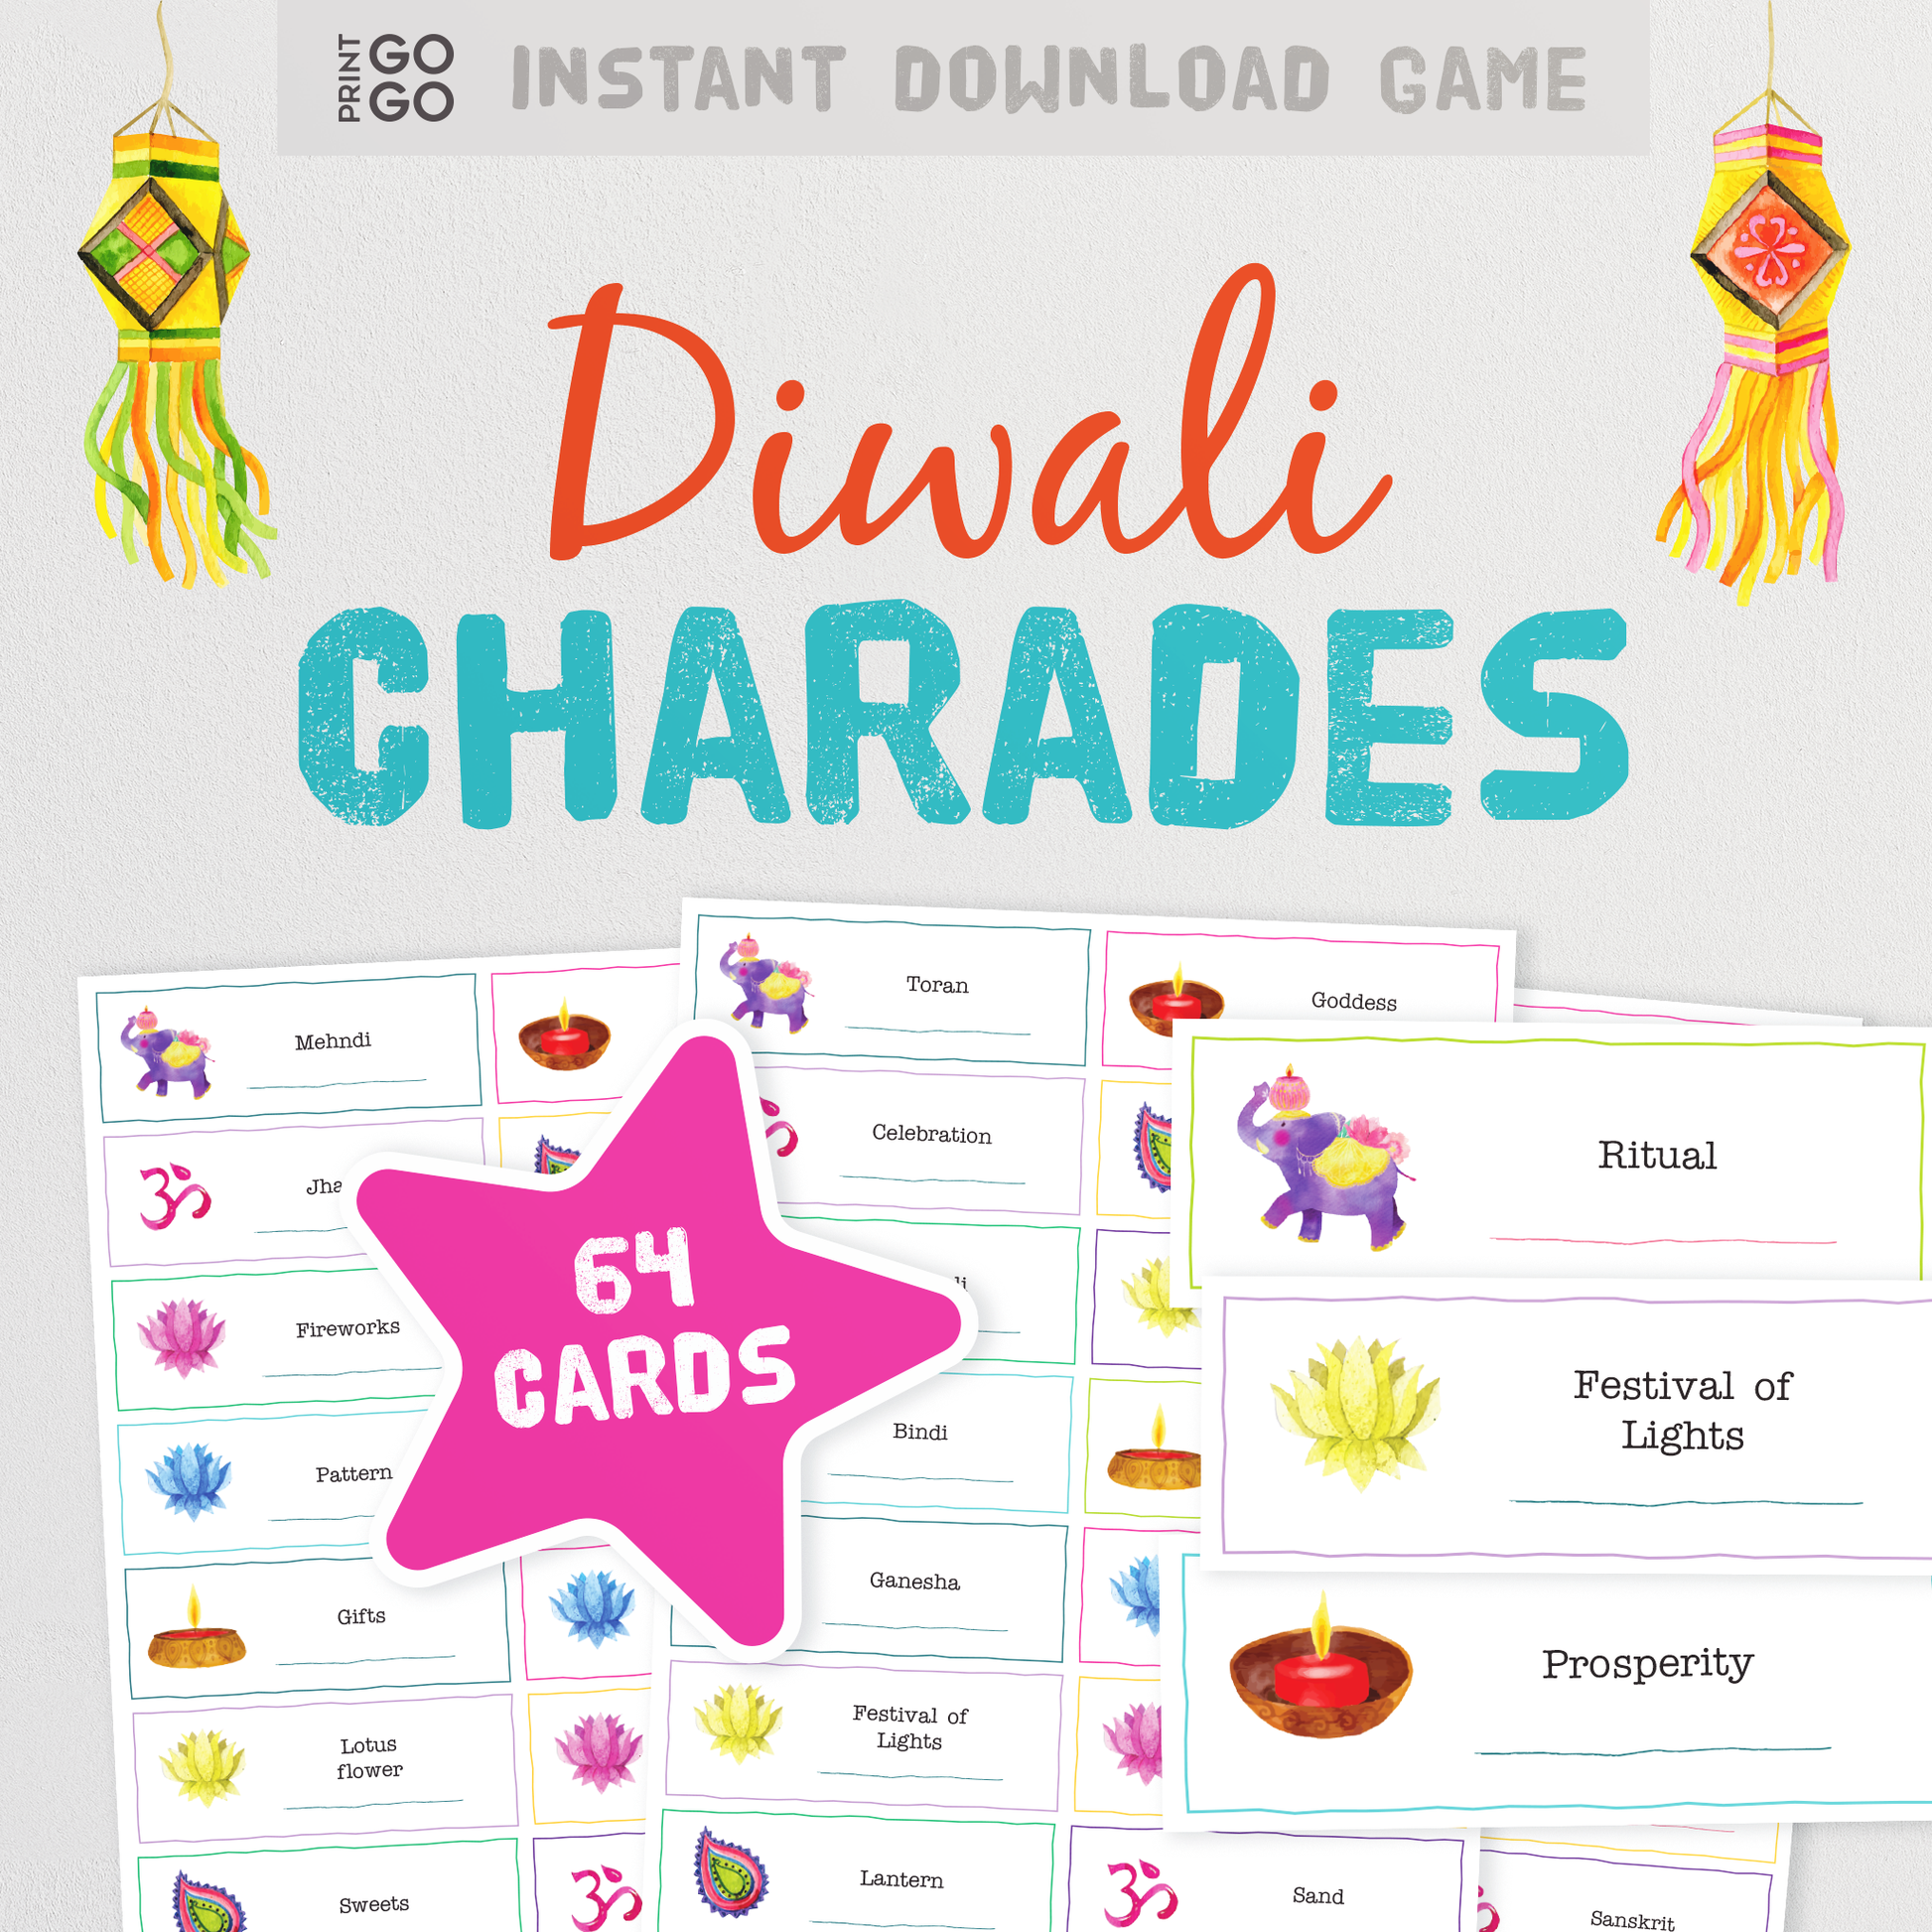 Diwali Charades - Celebrate the Festival of Light with a Fun Family Party Game of Acting Out and Guessing Phrases | Printable Team Game